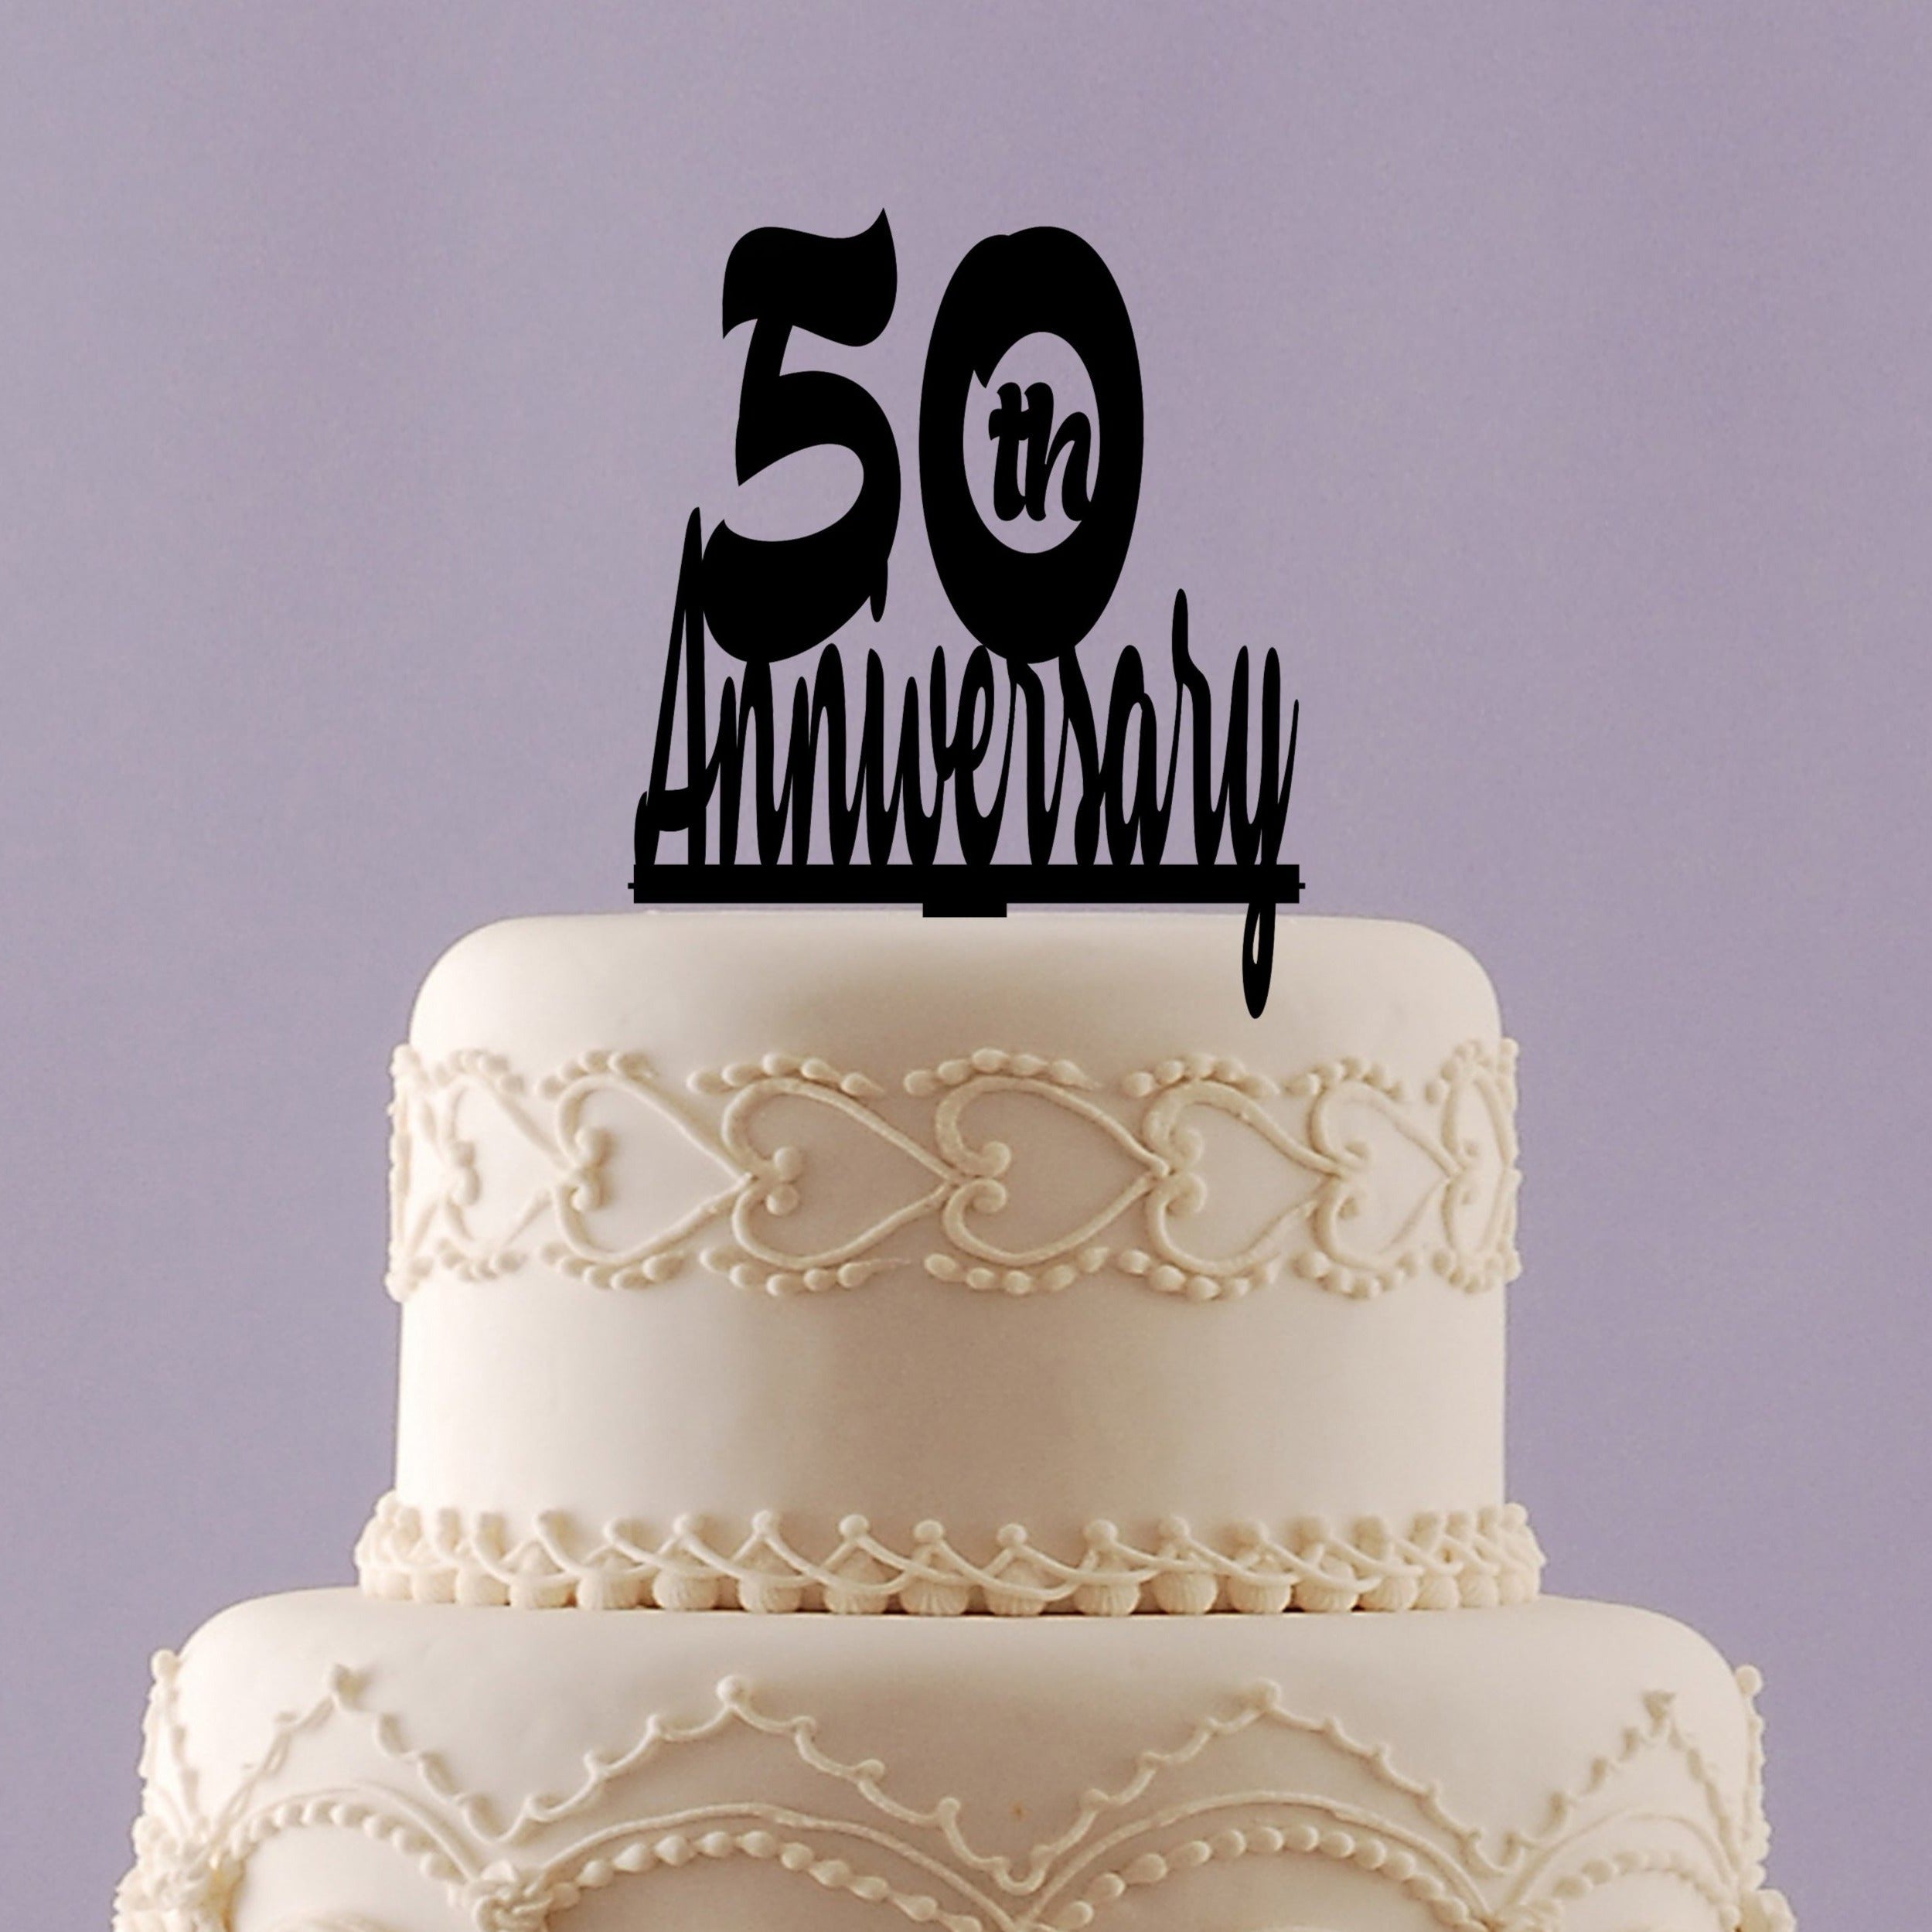 Crafty Cakes | Exeter | UK - Classic Golden Wedding Anniversary Cake with  Sugar Flowers Spray